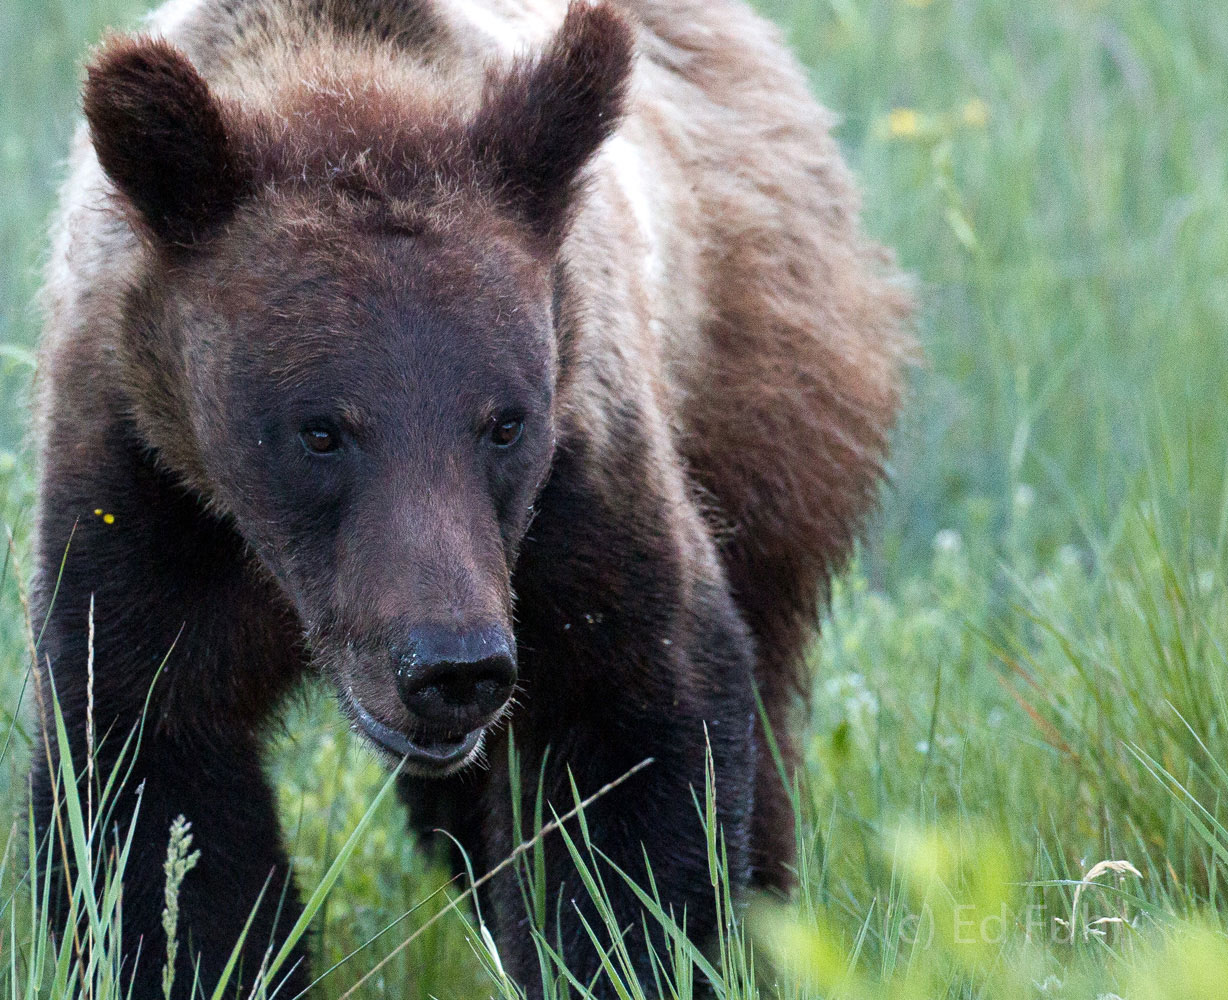 A close encounter with one of grizzly 610's cubs (from the safety of my parked truck).